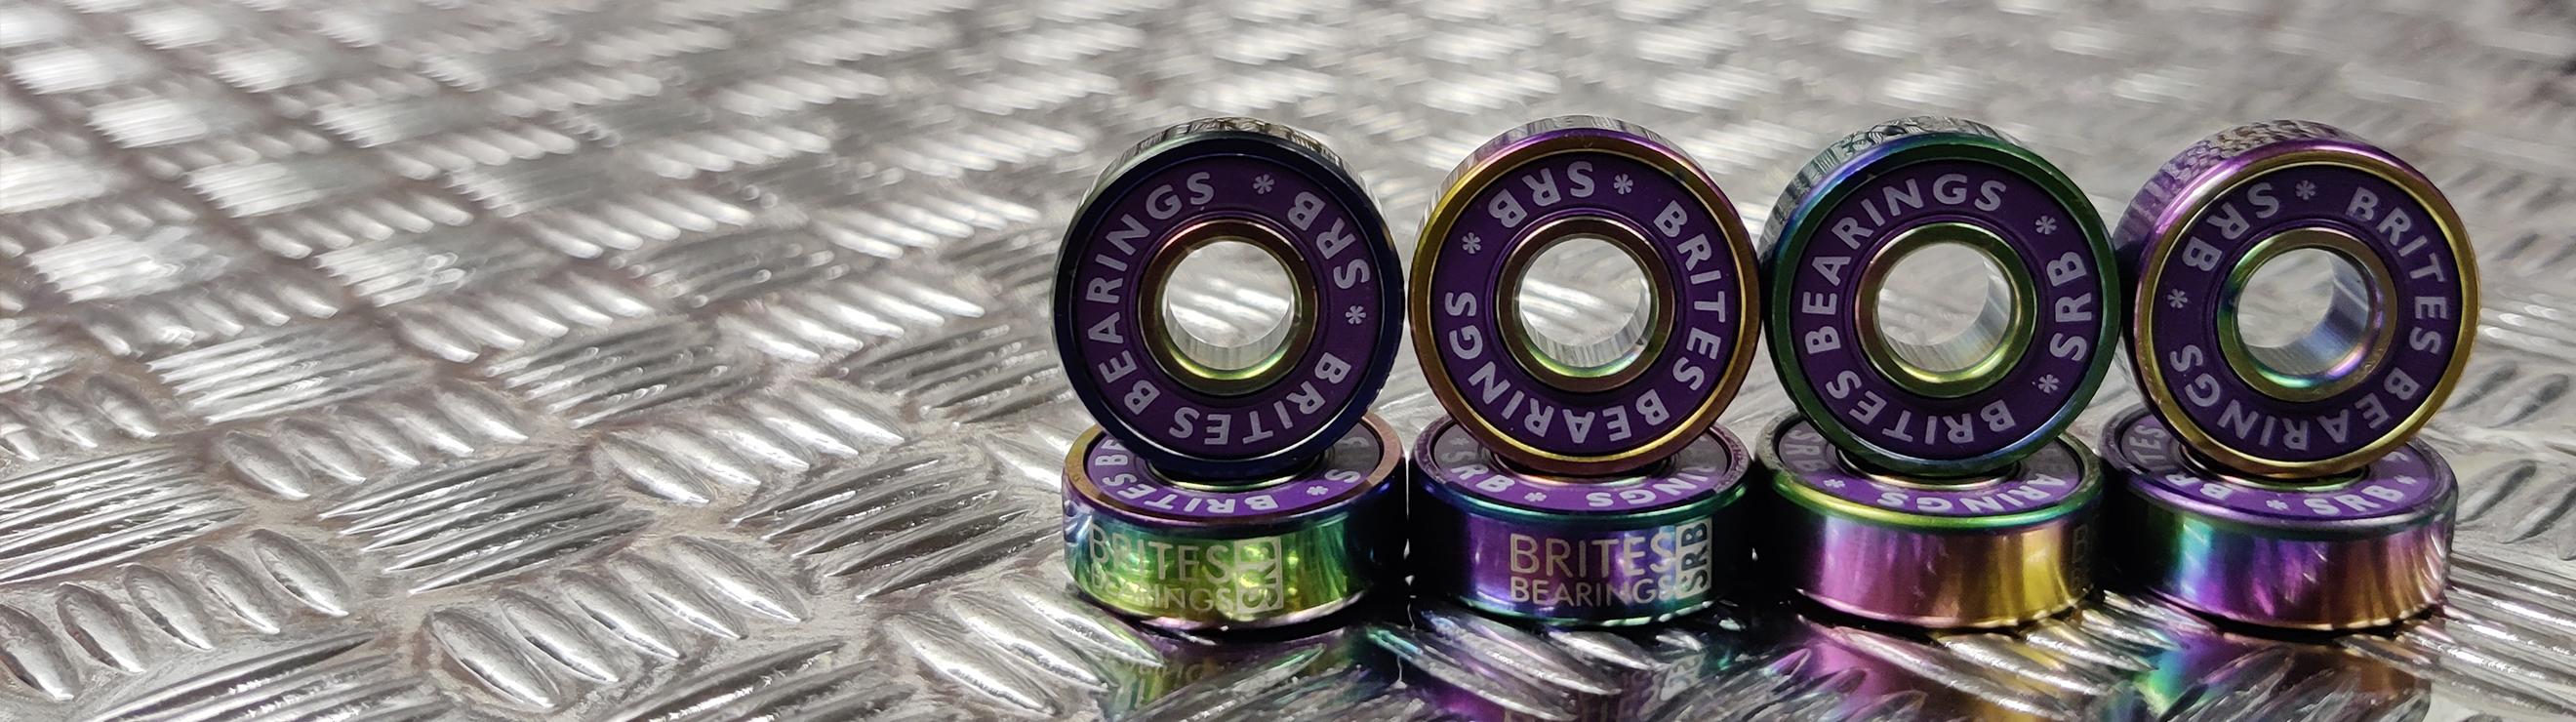 <h2 style="text-align: center;"><strong>Brites Ceramic Skate Rated Bearings</strong></h2><p style="text-align: center;">Available for Trade Purchases</p>